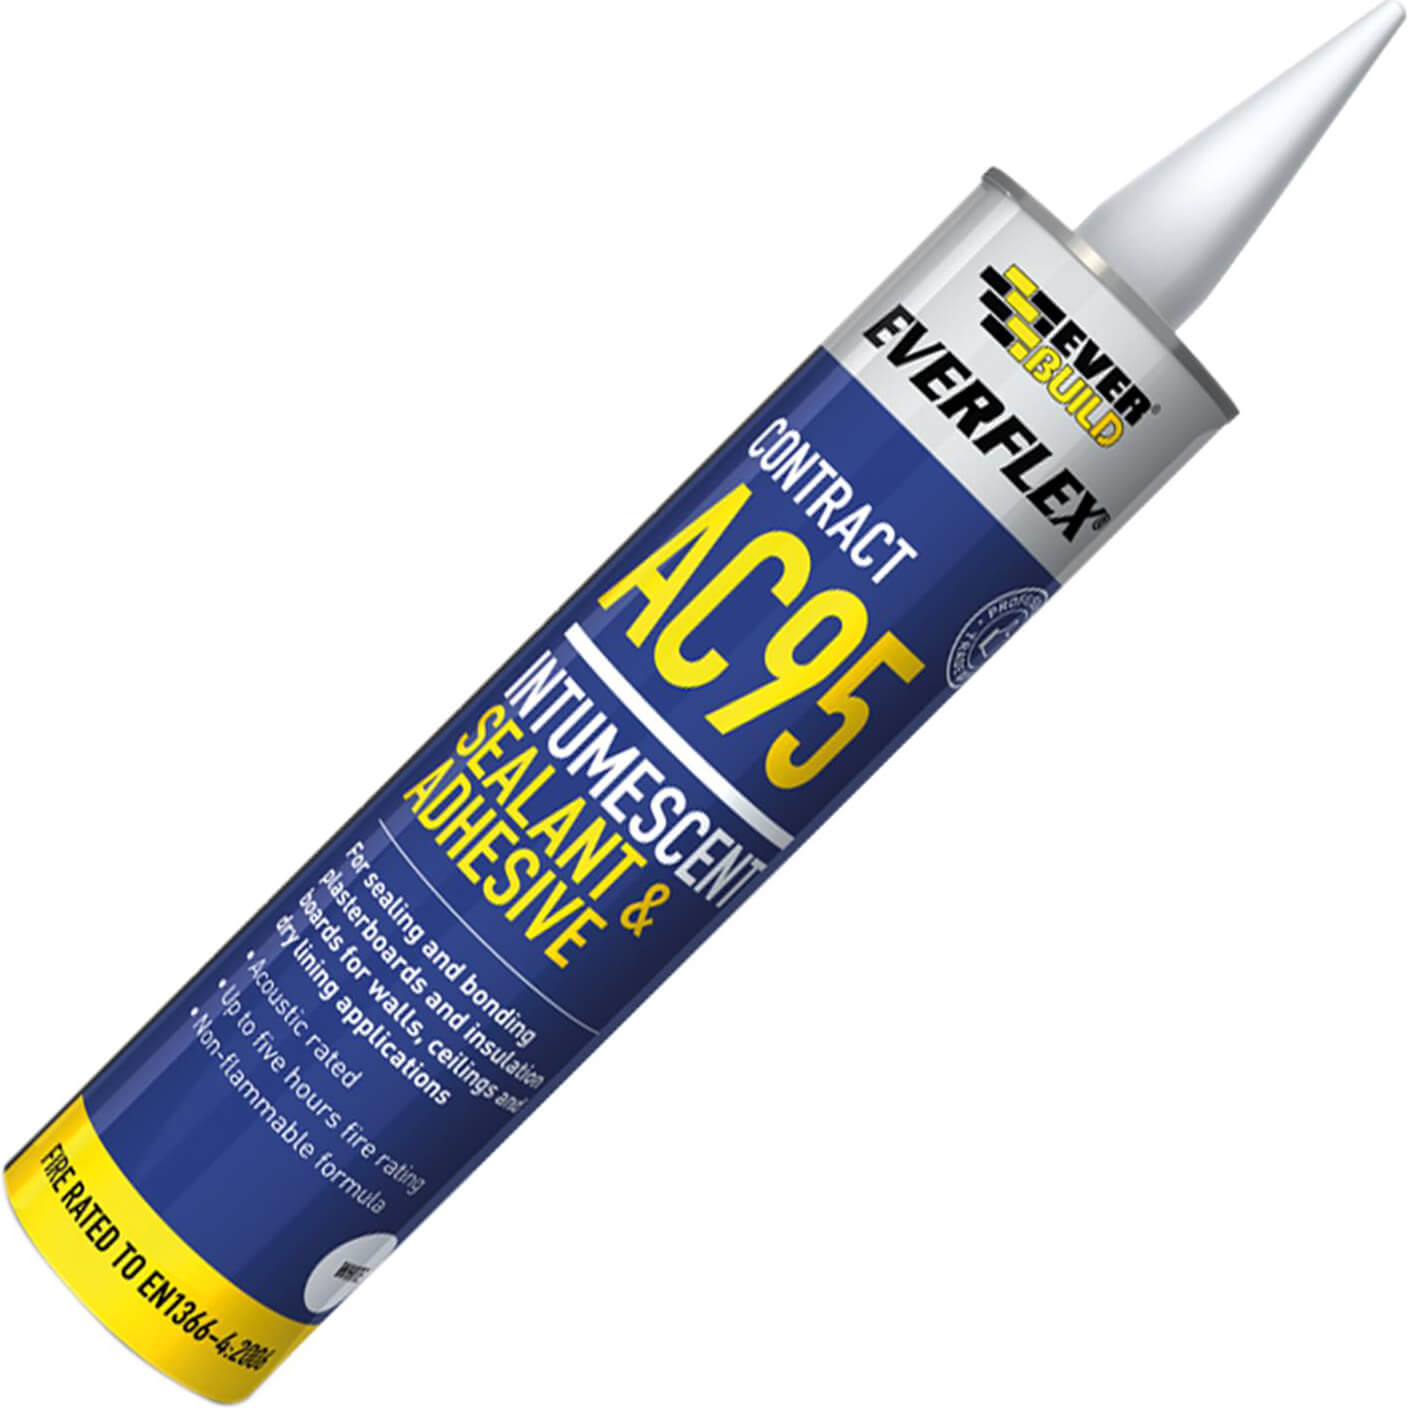 Image of Everbuild AC95 Intumescent Acoustic Sealant 900ml